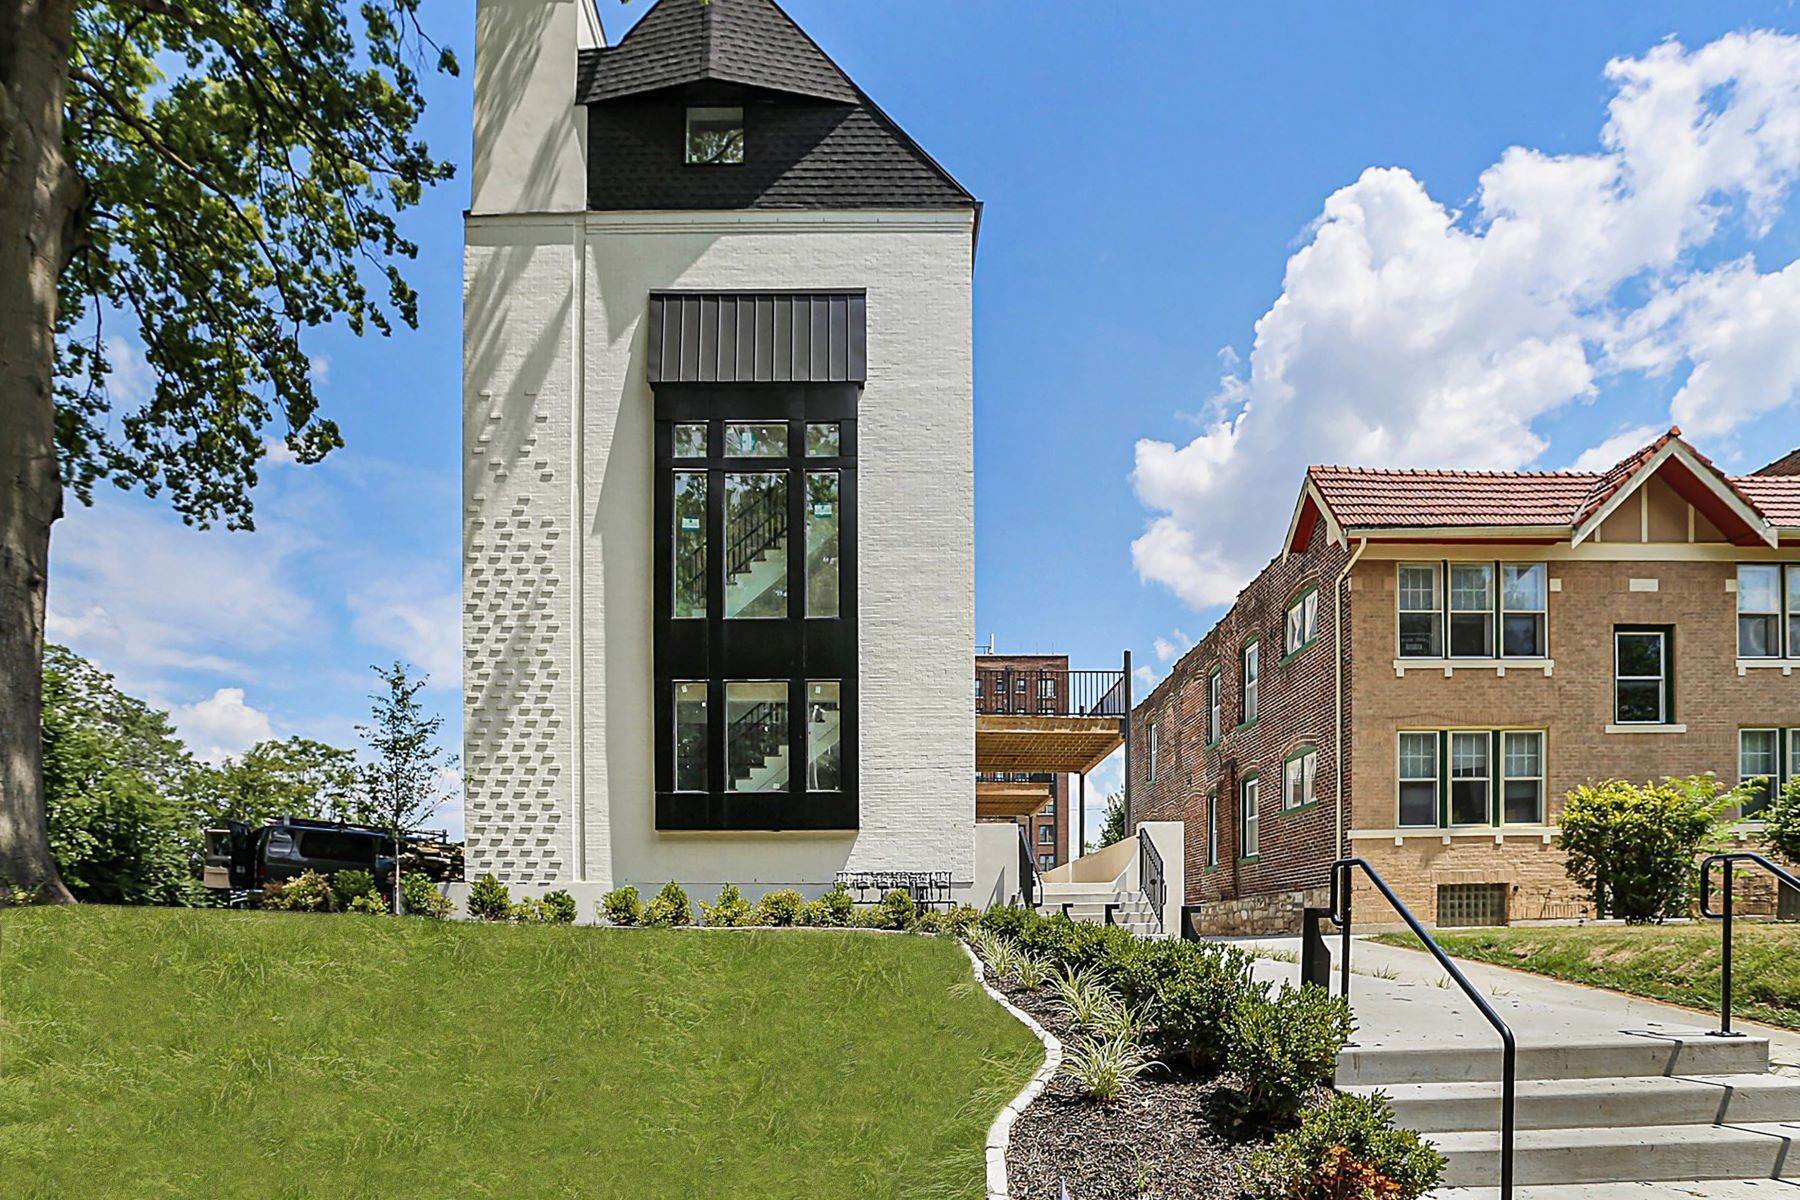 Townhouse for Sale at West Village Townhomes - 102 4201 West Pine Boulevard #102 St. Louis, Missouri 63108 United States